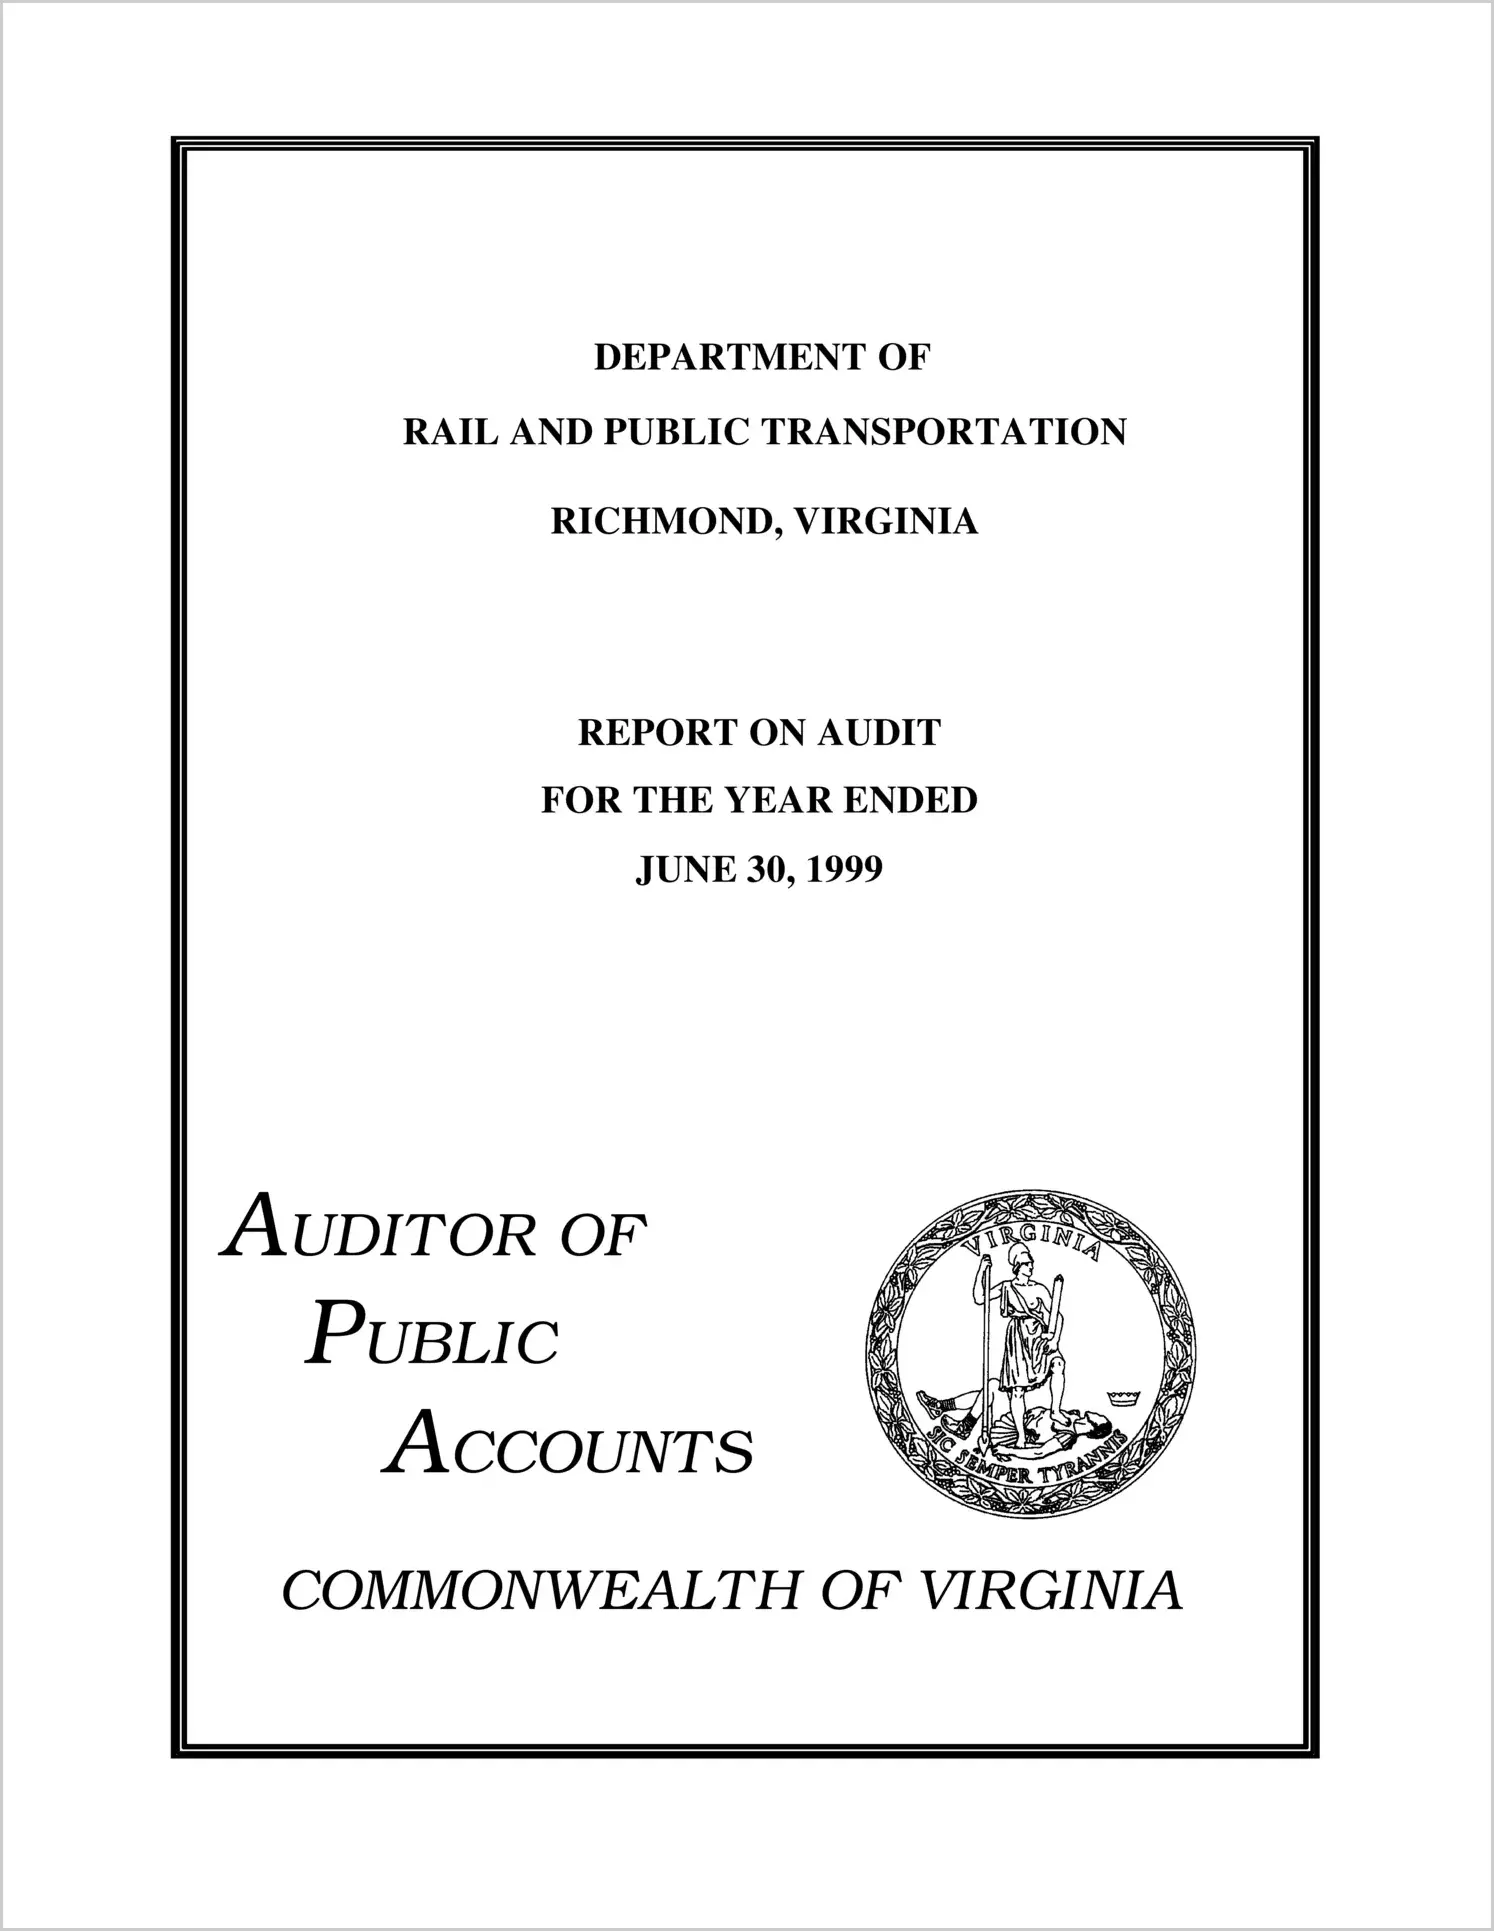 Department of Rail and Public Transportation for the year ended June 30, 1999